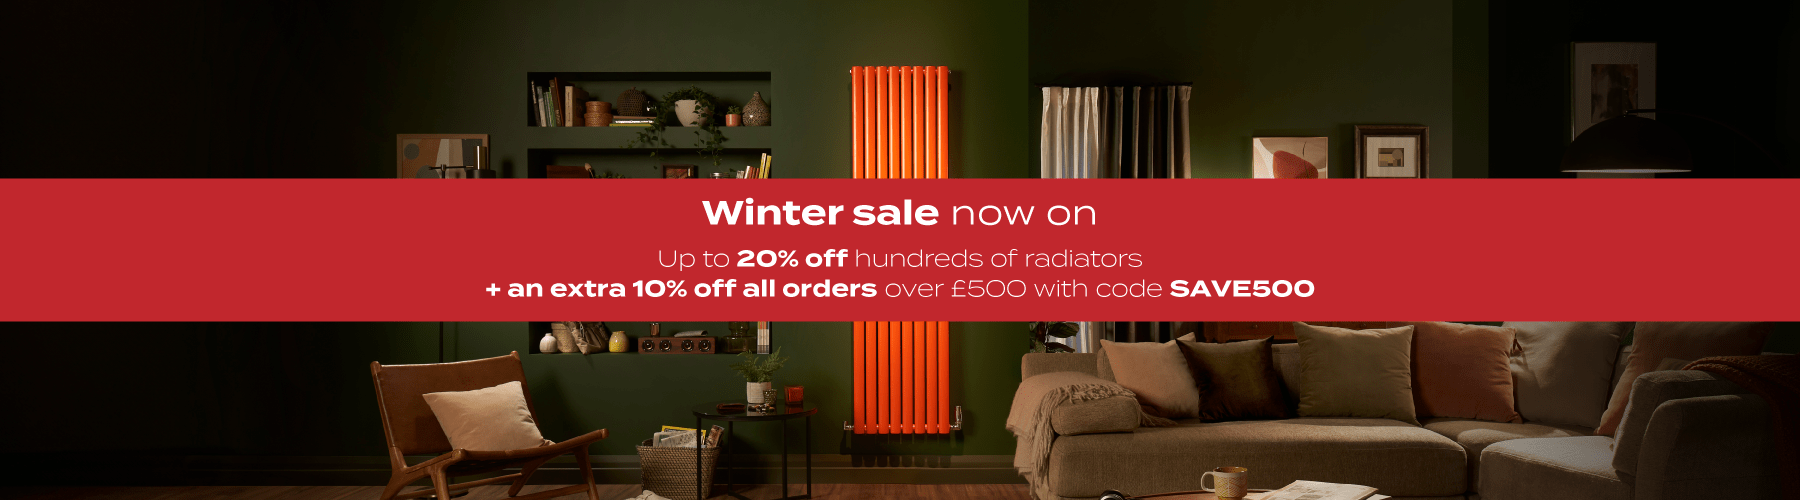  Winter Sale | up to 20% off hundreds of radiators + an extra 10% off orders over £500 with code SAVE500 